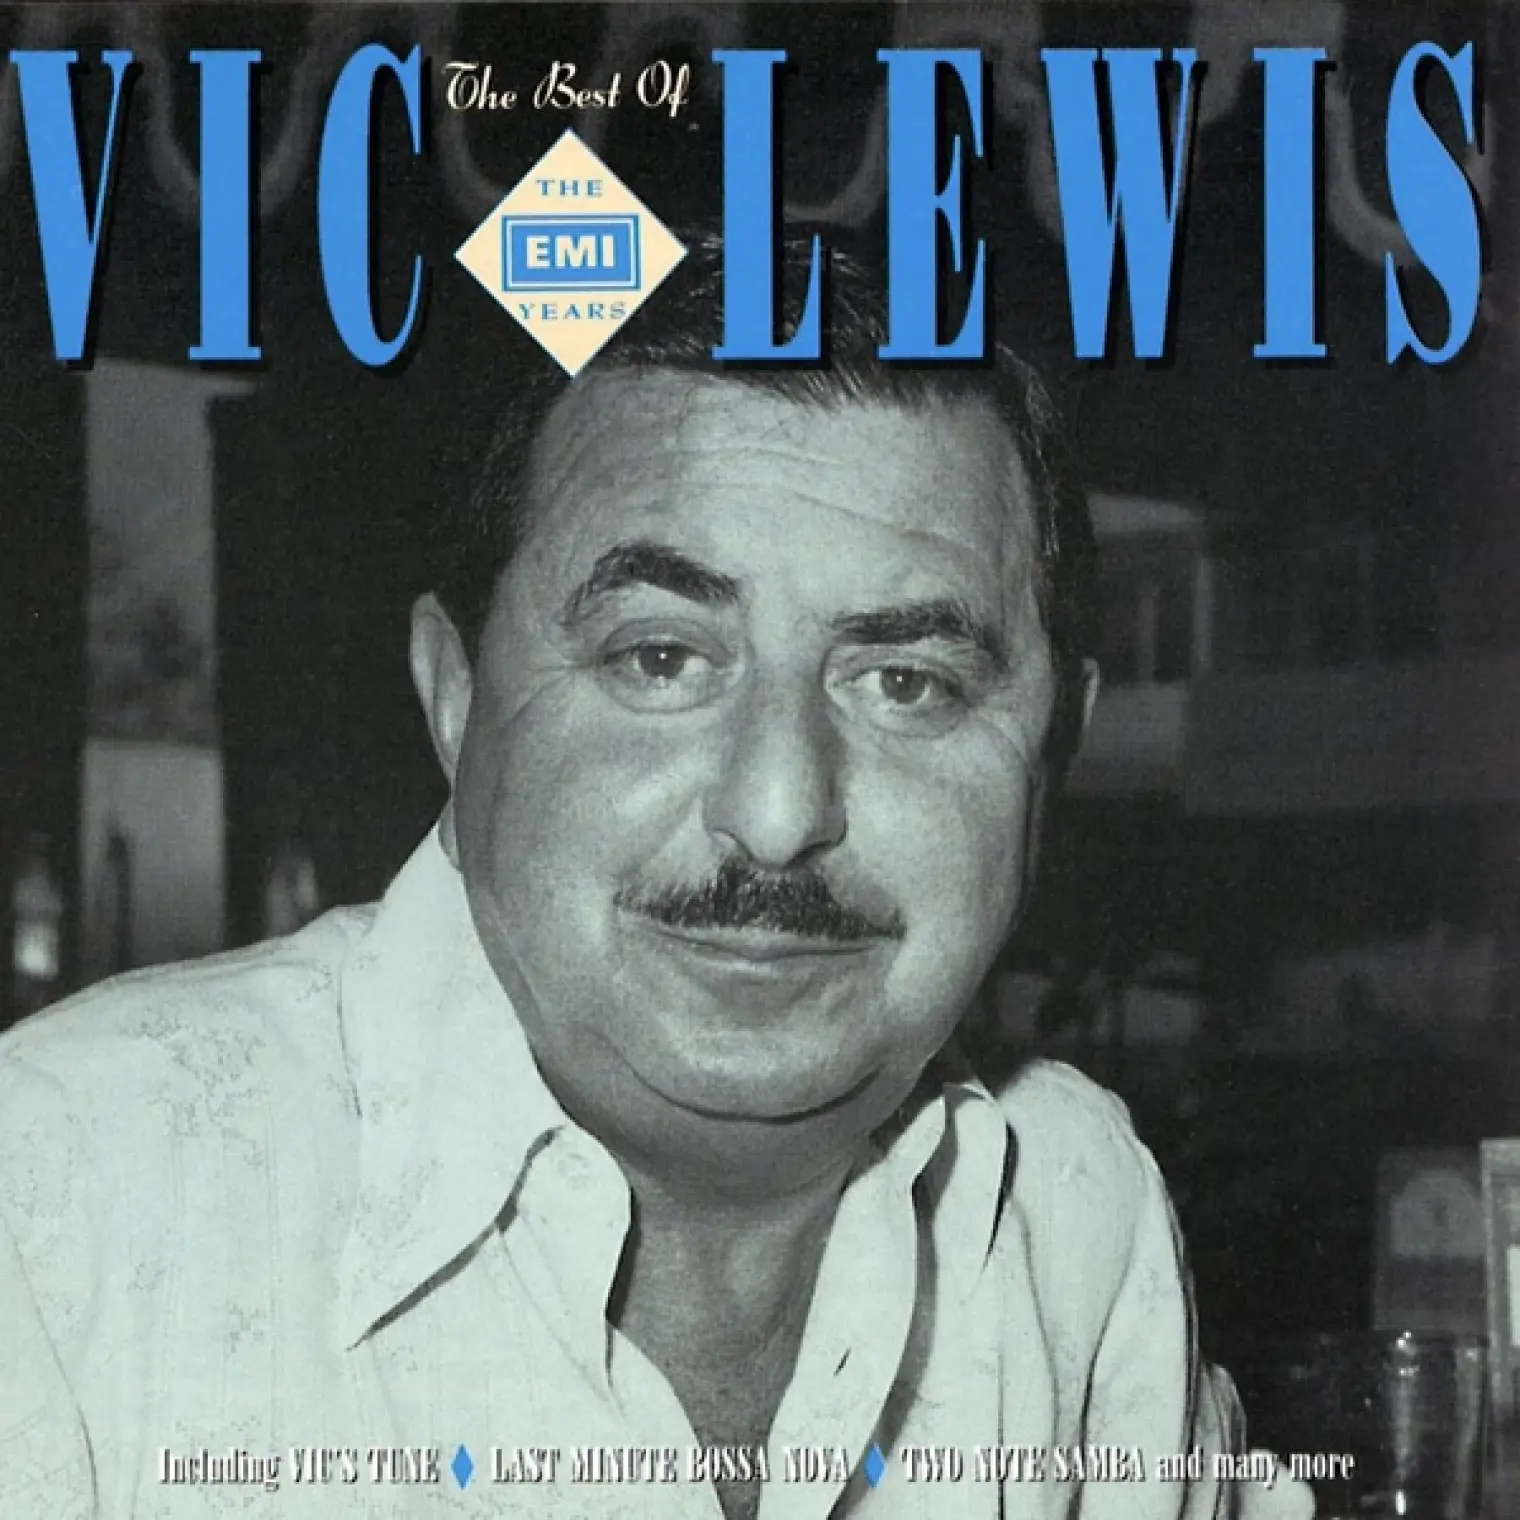 The Best Of The EMI Years -  Vic Lewis 